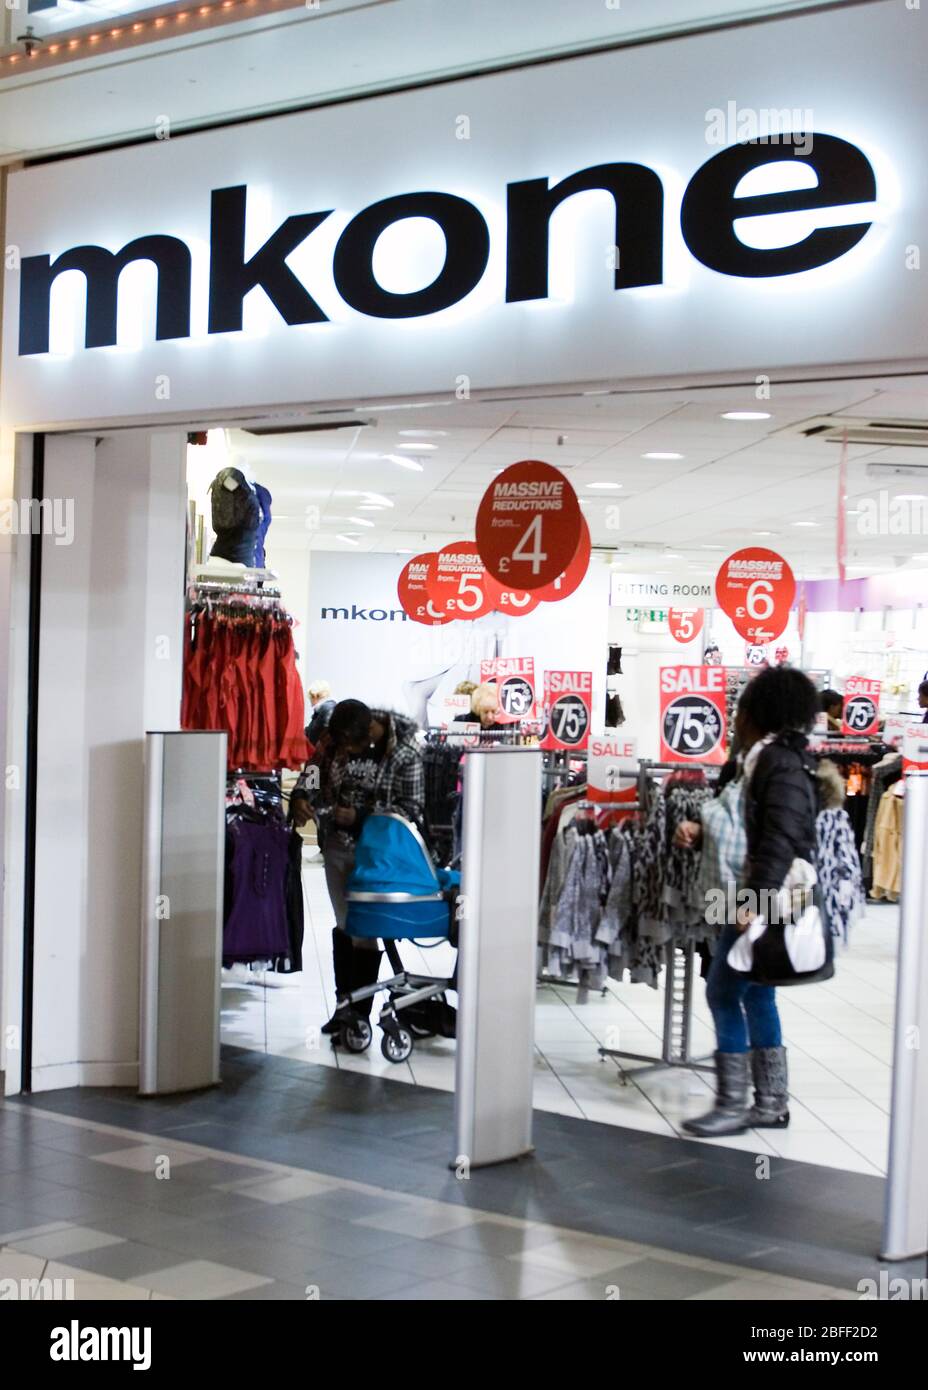 A MK One clothing retailer outlet in 